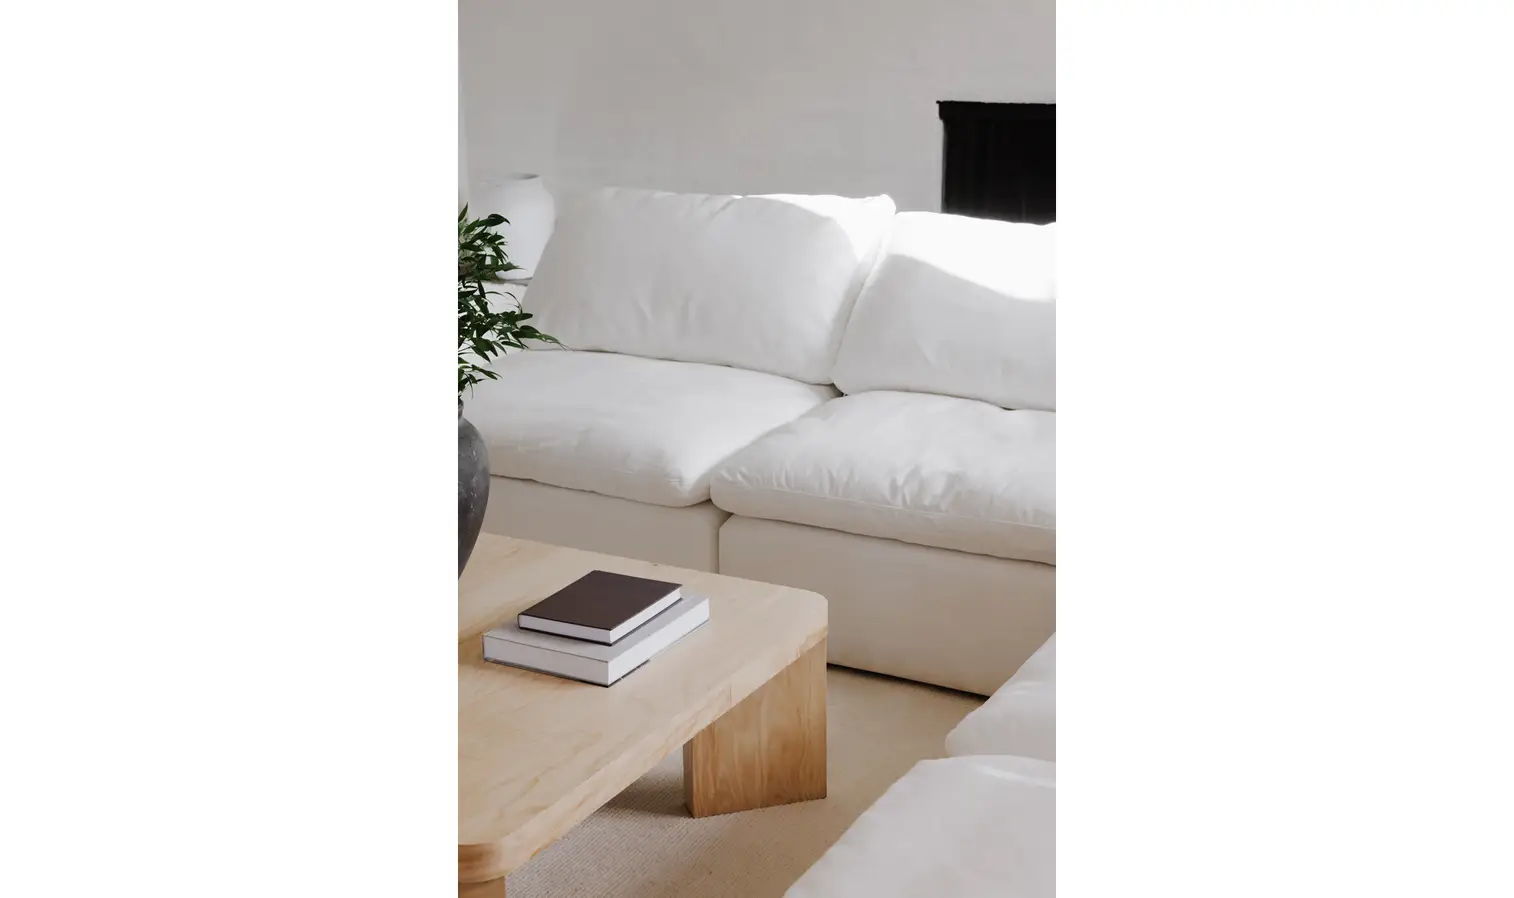 Terra Condo Cream White Modular Sectional - Stain-Resistant-Stationary Sectionals-American Furniture Outlet